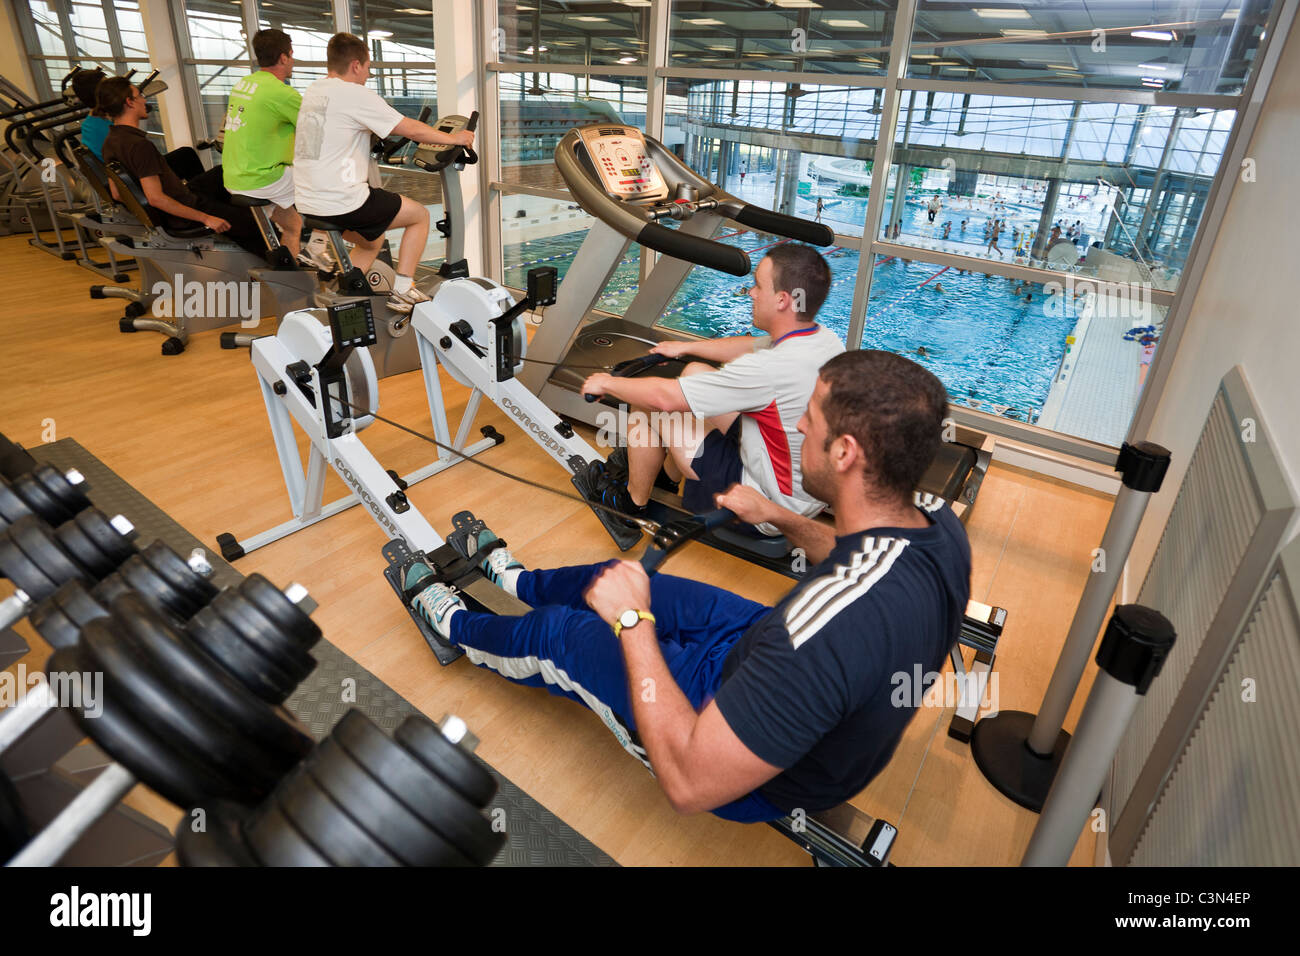 Weights and cardio training room of the Vichy - Val d'Allier swimming pool. Salle de musculation et de cardio-training. Stock Photo